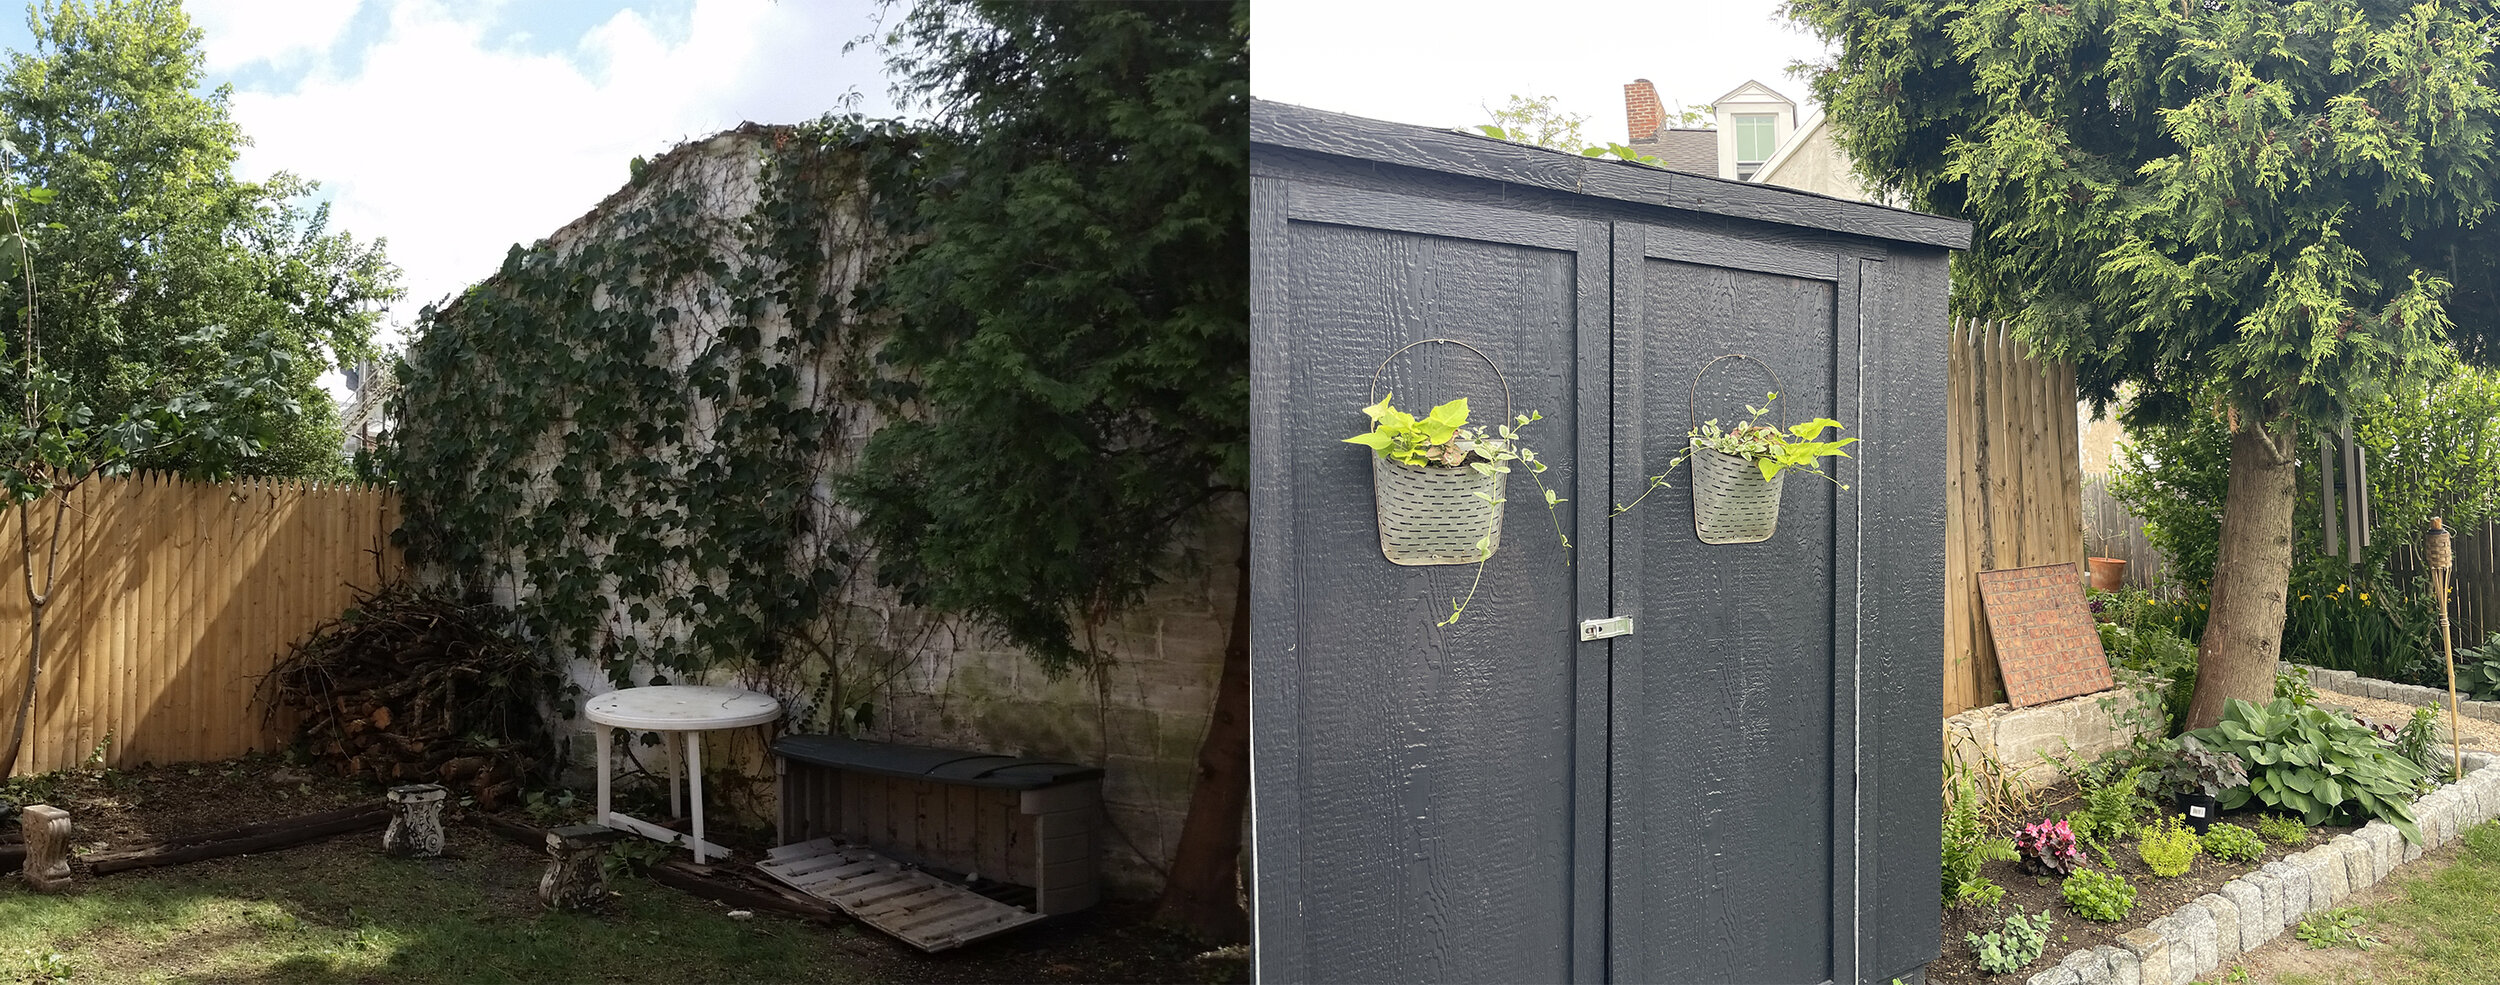 BEFORE: Old garage, piles of sticks, no garden, and a bunch a junk left from the people who lived here before us. AFTER: Cutey shed and new garden! Same tree on the right hand side of each image)